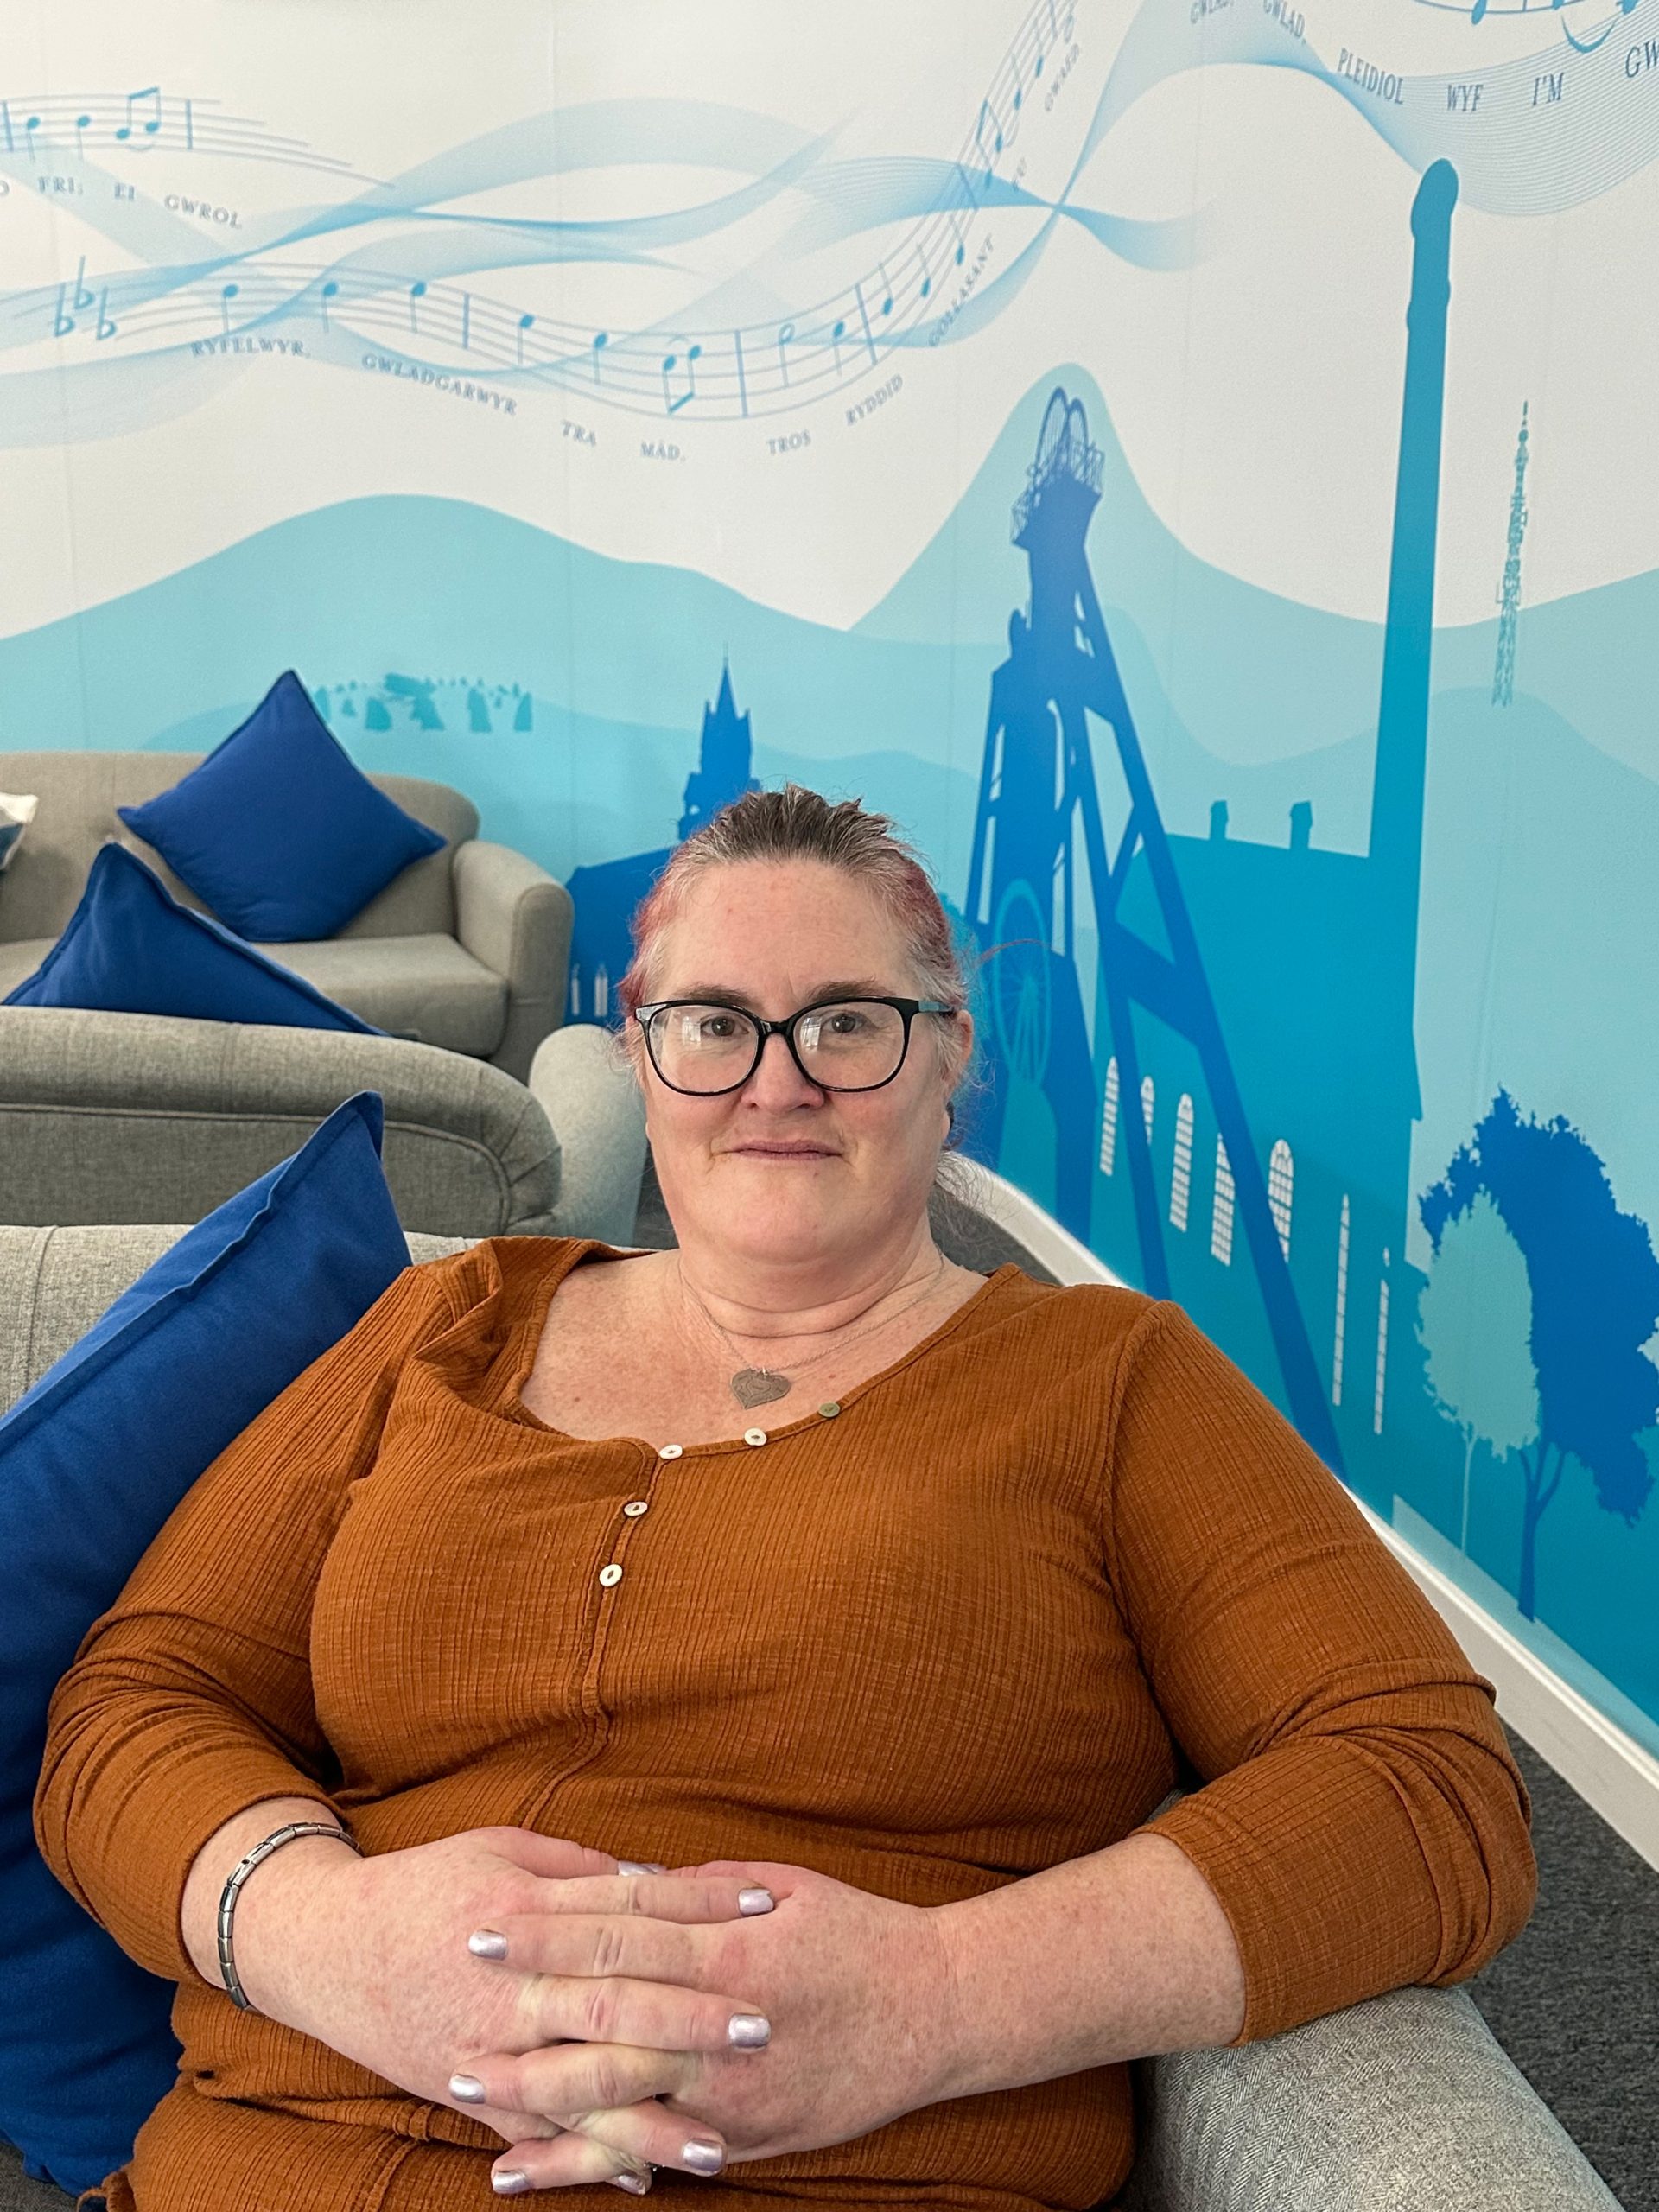 Trivallis Housing Landlord Wales A woman with glasses and a rust-colored top sitting comfortably on a grey couch with blue cushions, against a playful blue mural featuring musical notes and iconic structures.